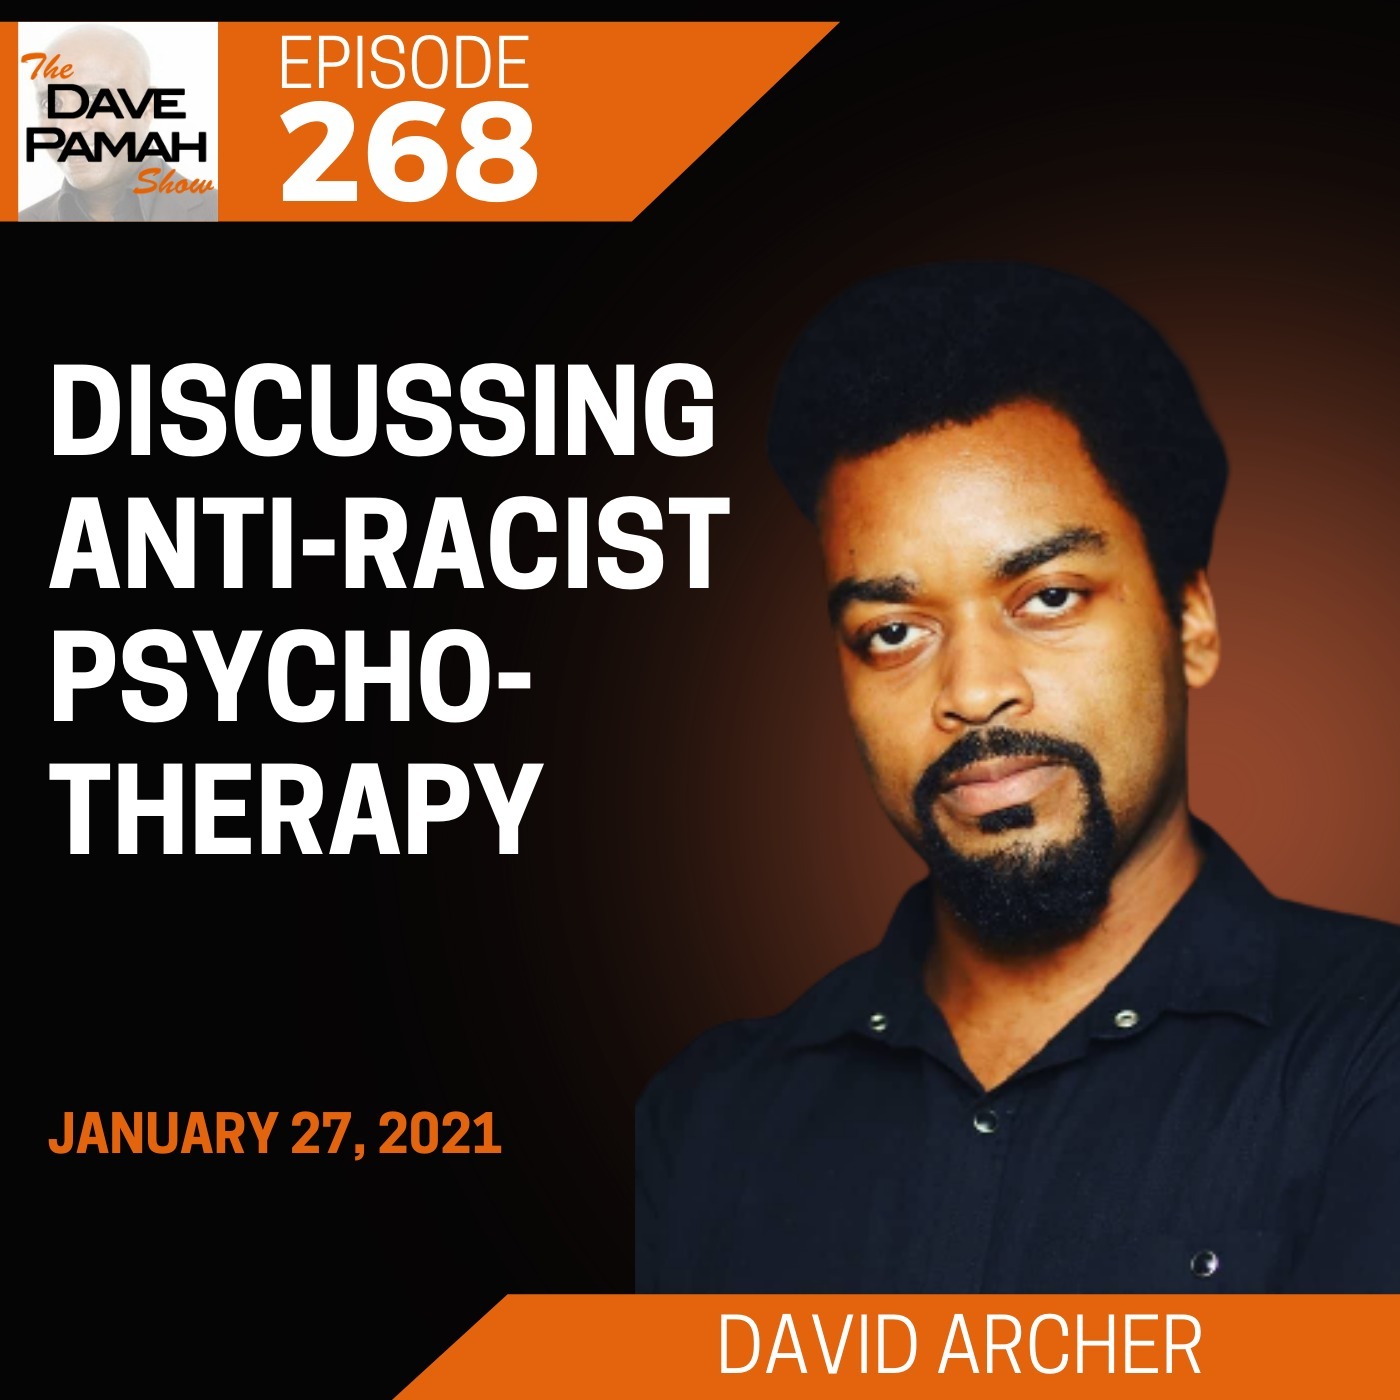 Discussing Anti-Racist Psychotherapy with David Archer